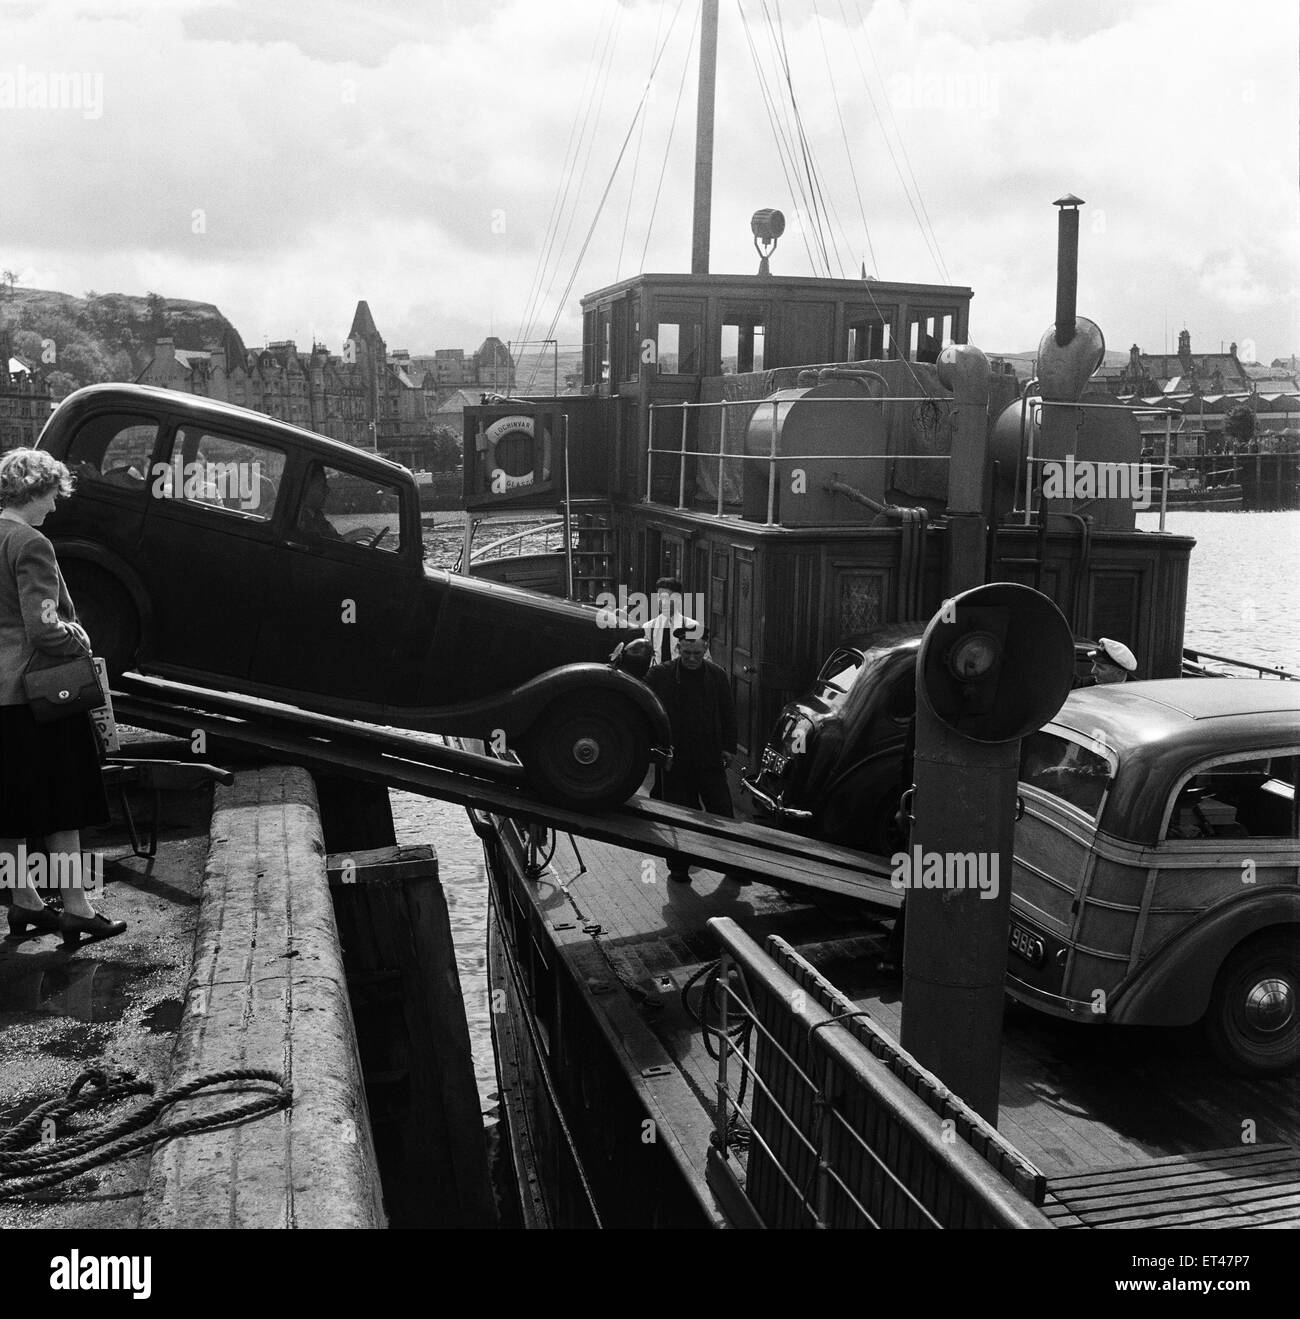 Loading a car onto a ferry steamer at the Quay at Oban. Oban is a resort town within the Argyll and Bute council area of Scotland. 23rd August 1951. Stock Photo